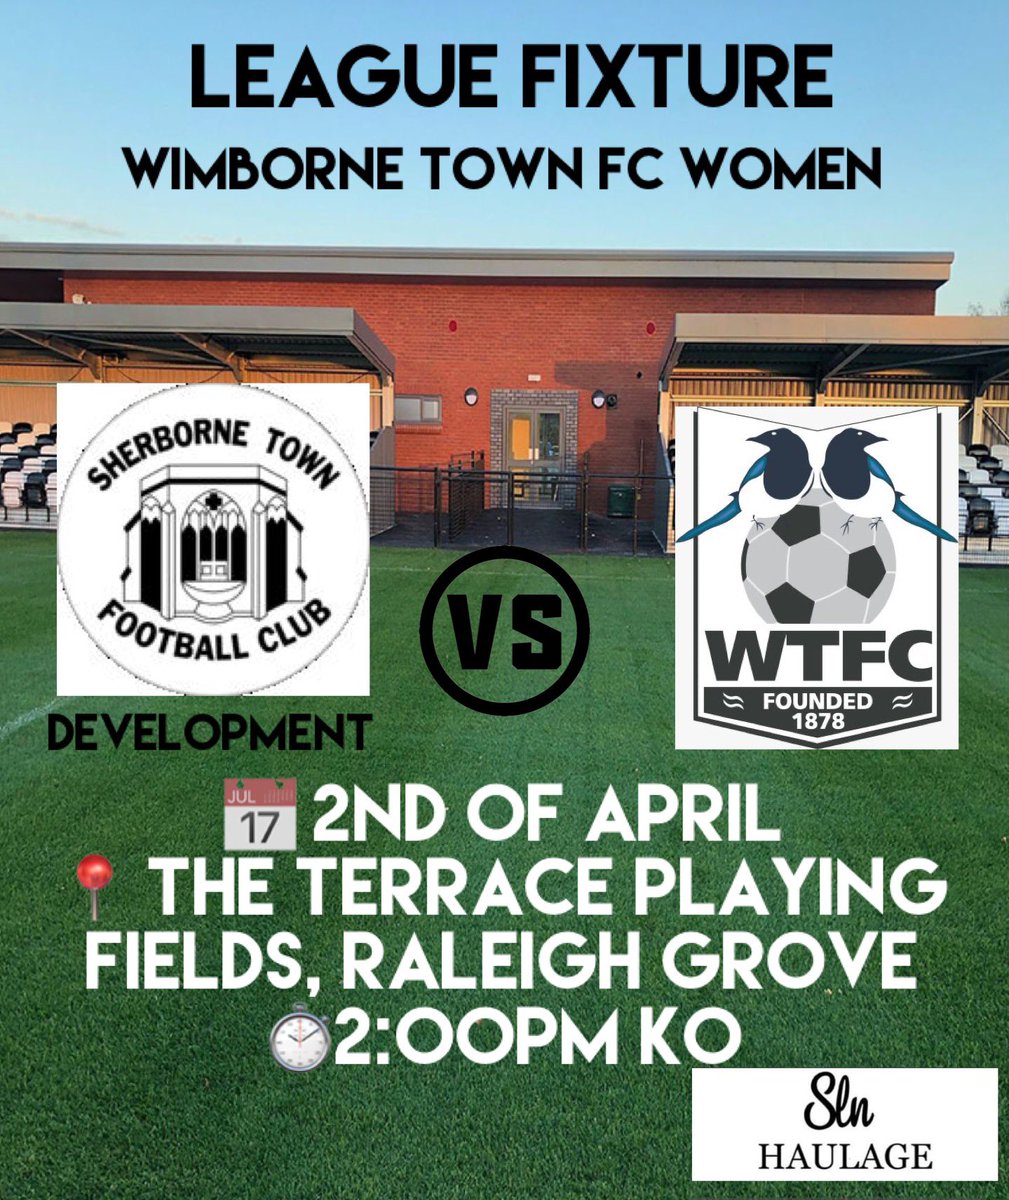 Our last league fixture against Sherborne Town Development 🙌⚫️⚪️

🆚Sherborne Town Development 

📆 2nd April 

📍The Terrace Playing Fields  

⏱2pm

Please come and support us 🙌⚫️⚪️

#upthemagpies #WimborneTownFc